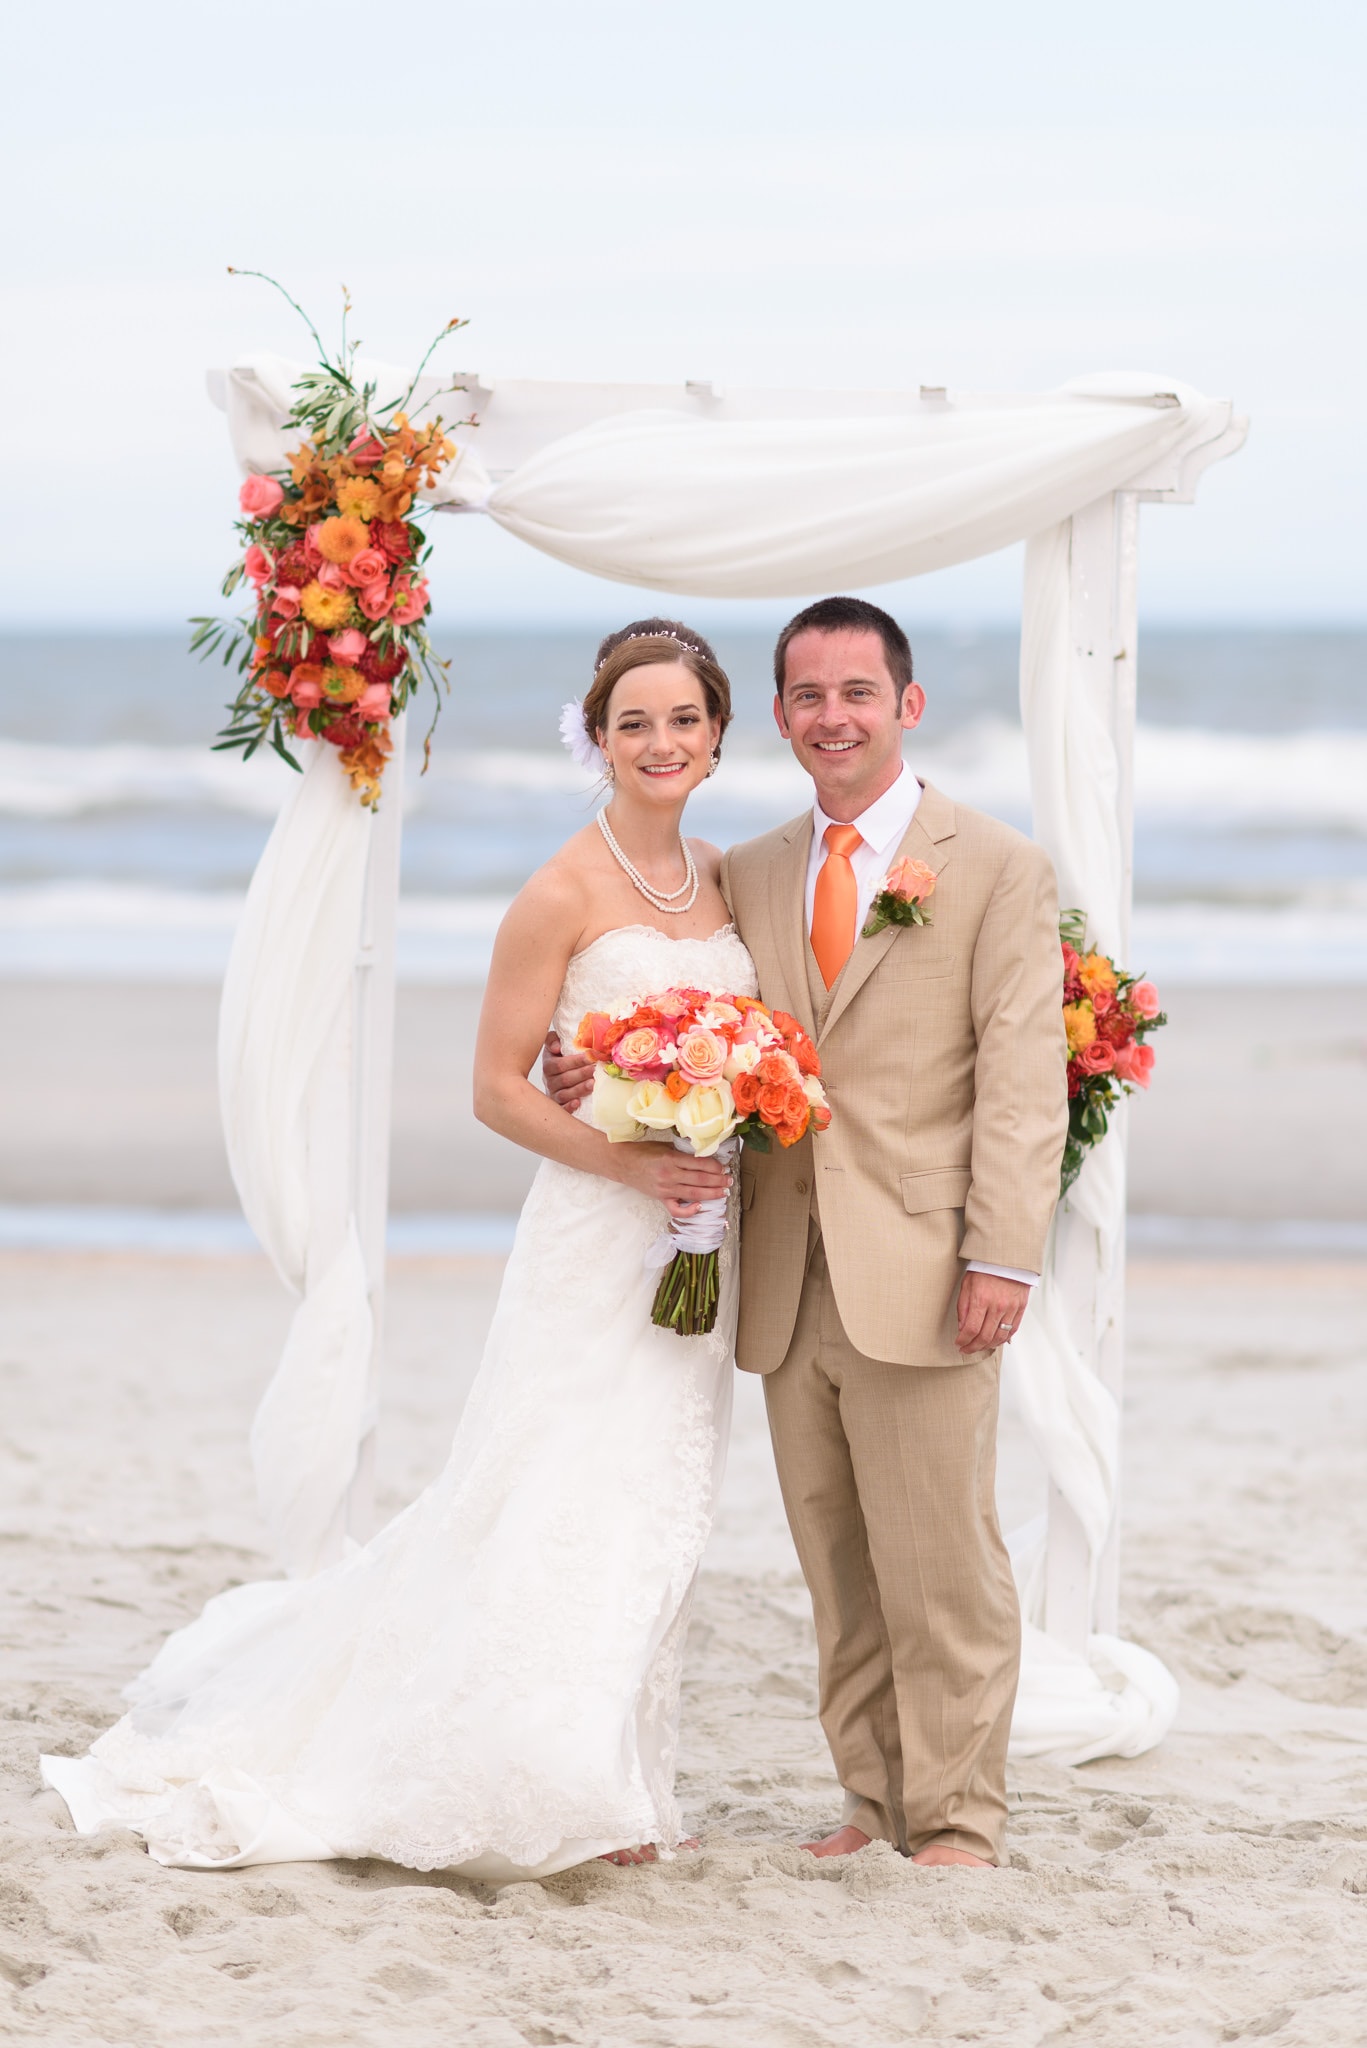 Bride and groom standing in front of beach wedding arbor - Hilton at Kingston Plantation